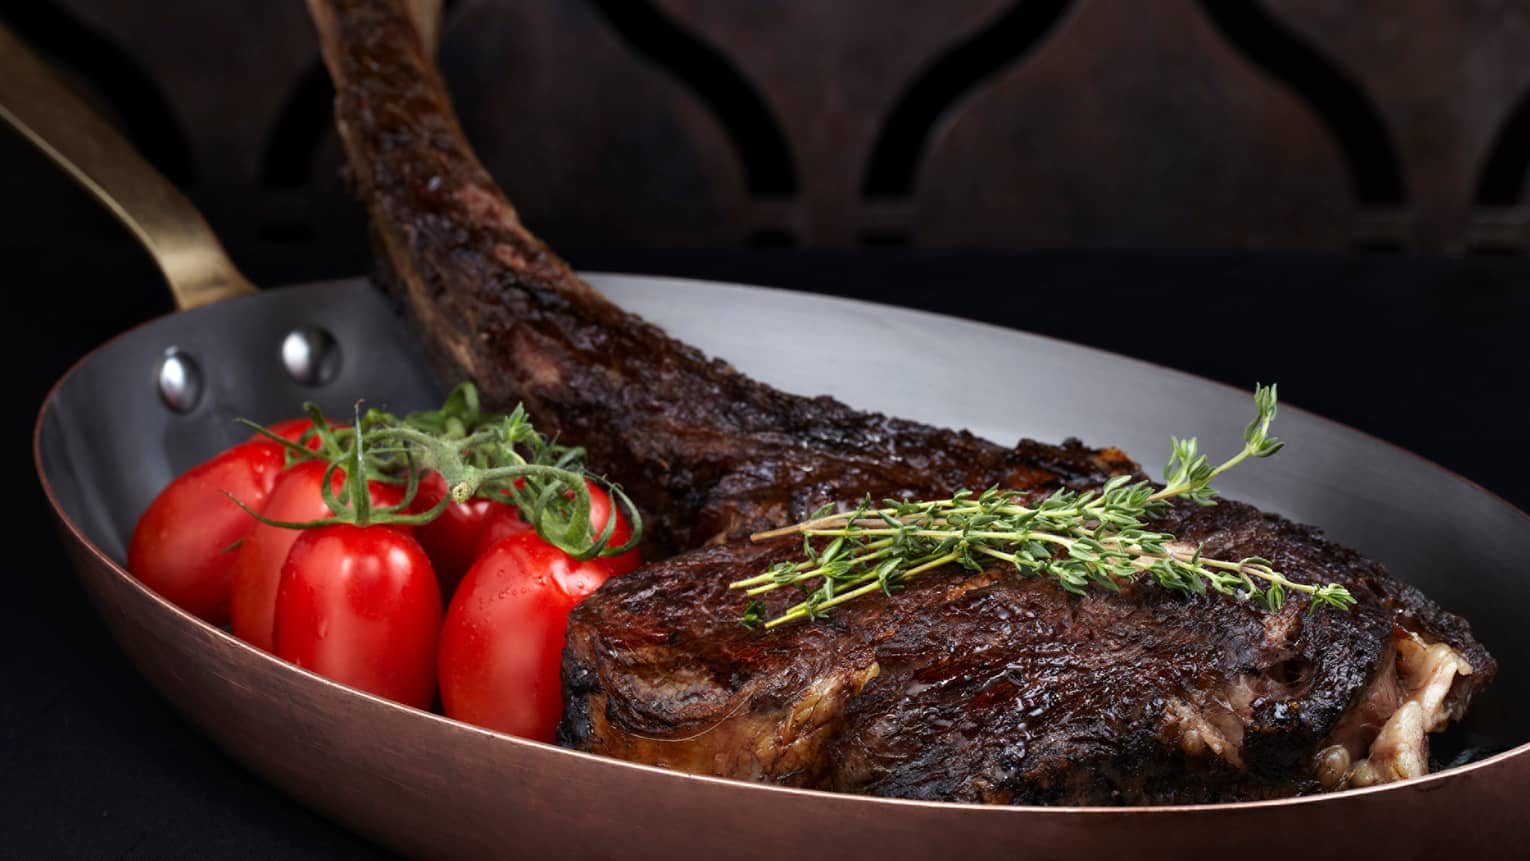 Wagyu beef tomahawk 30 ounce grilled chop in pan with whole tomatoes, herbs